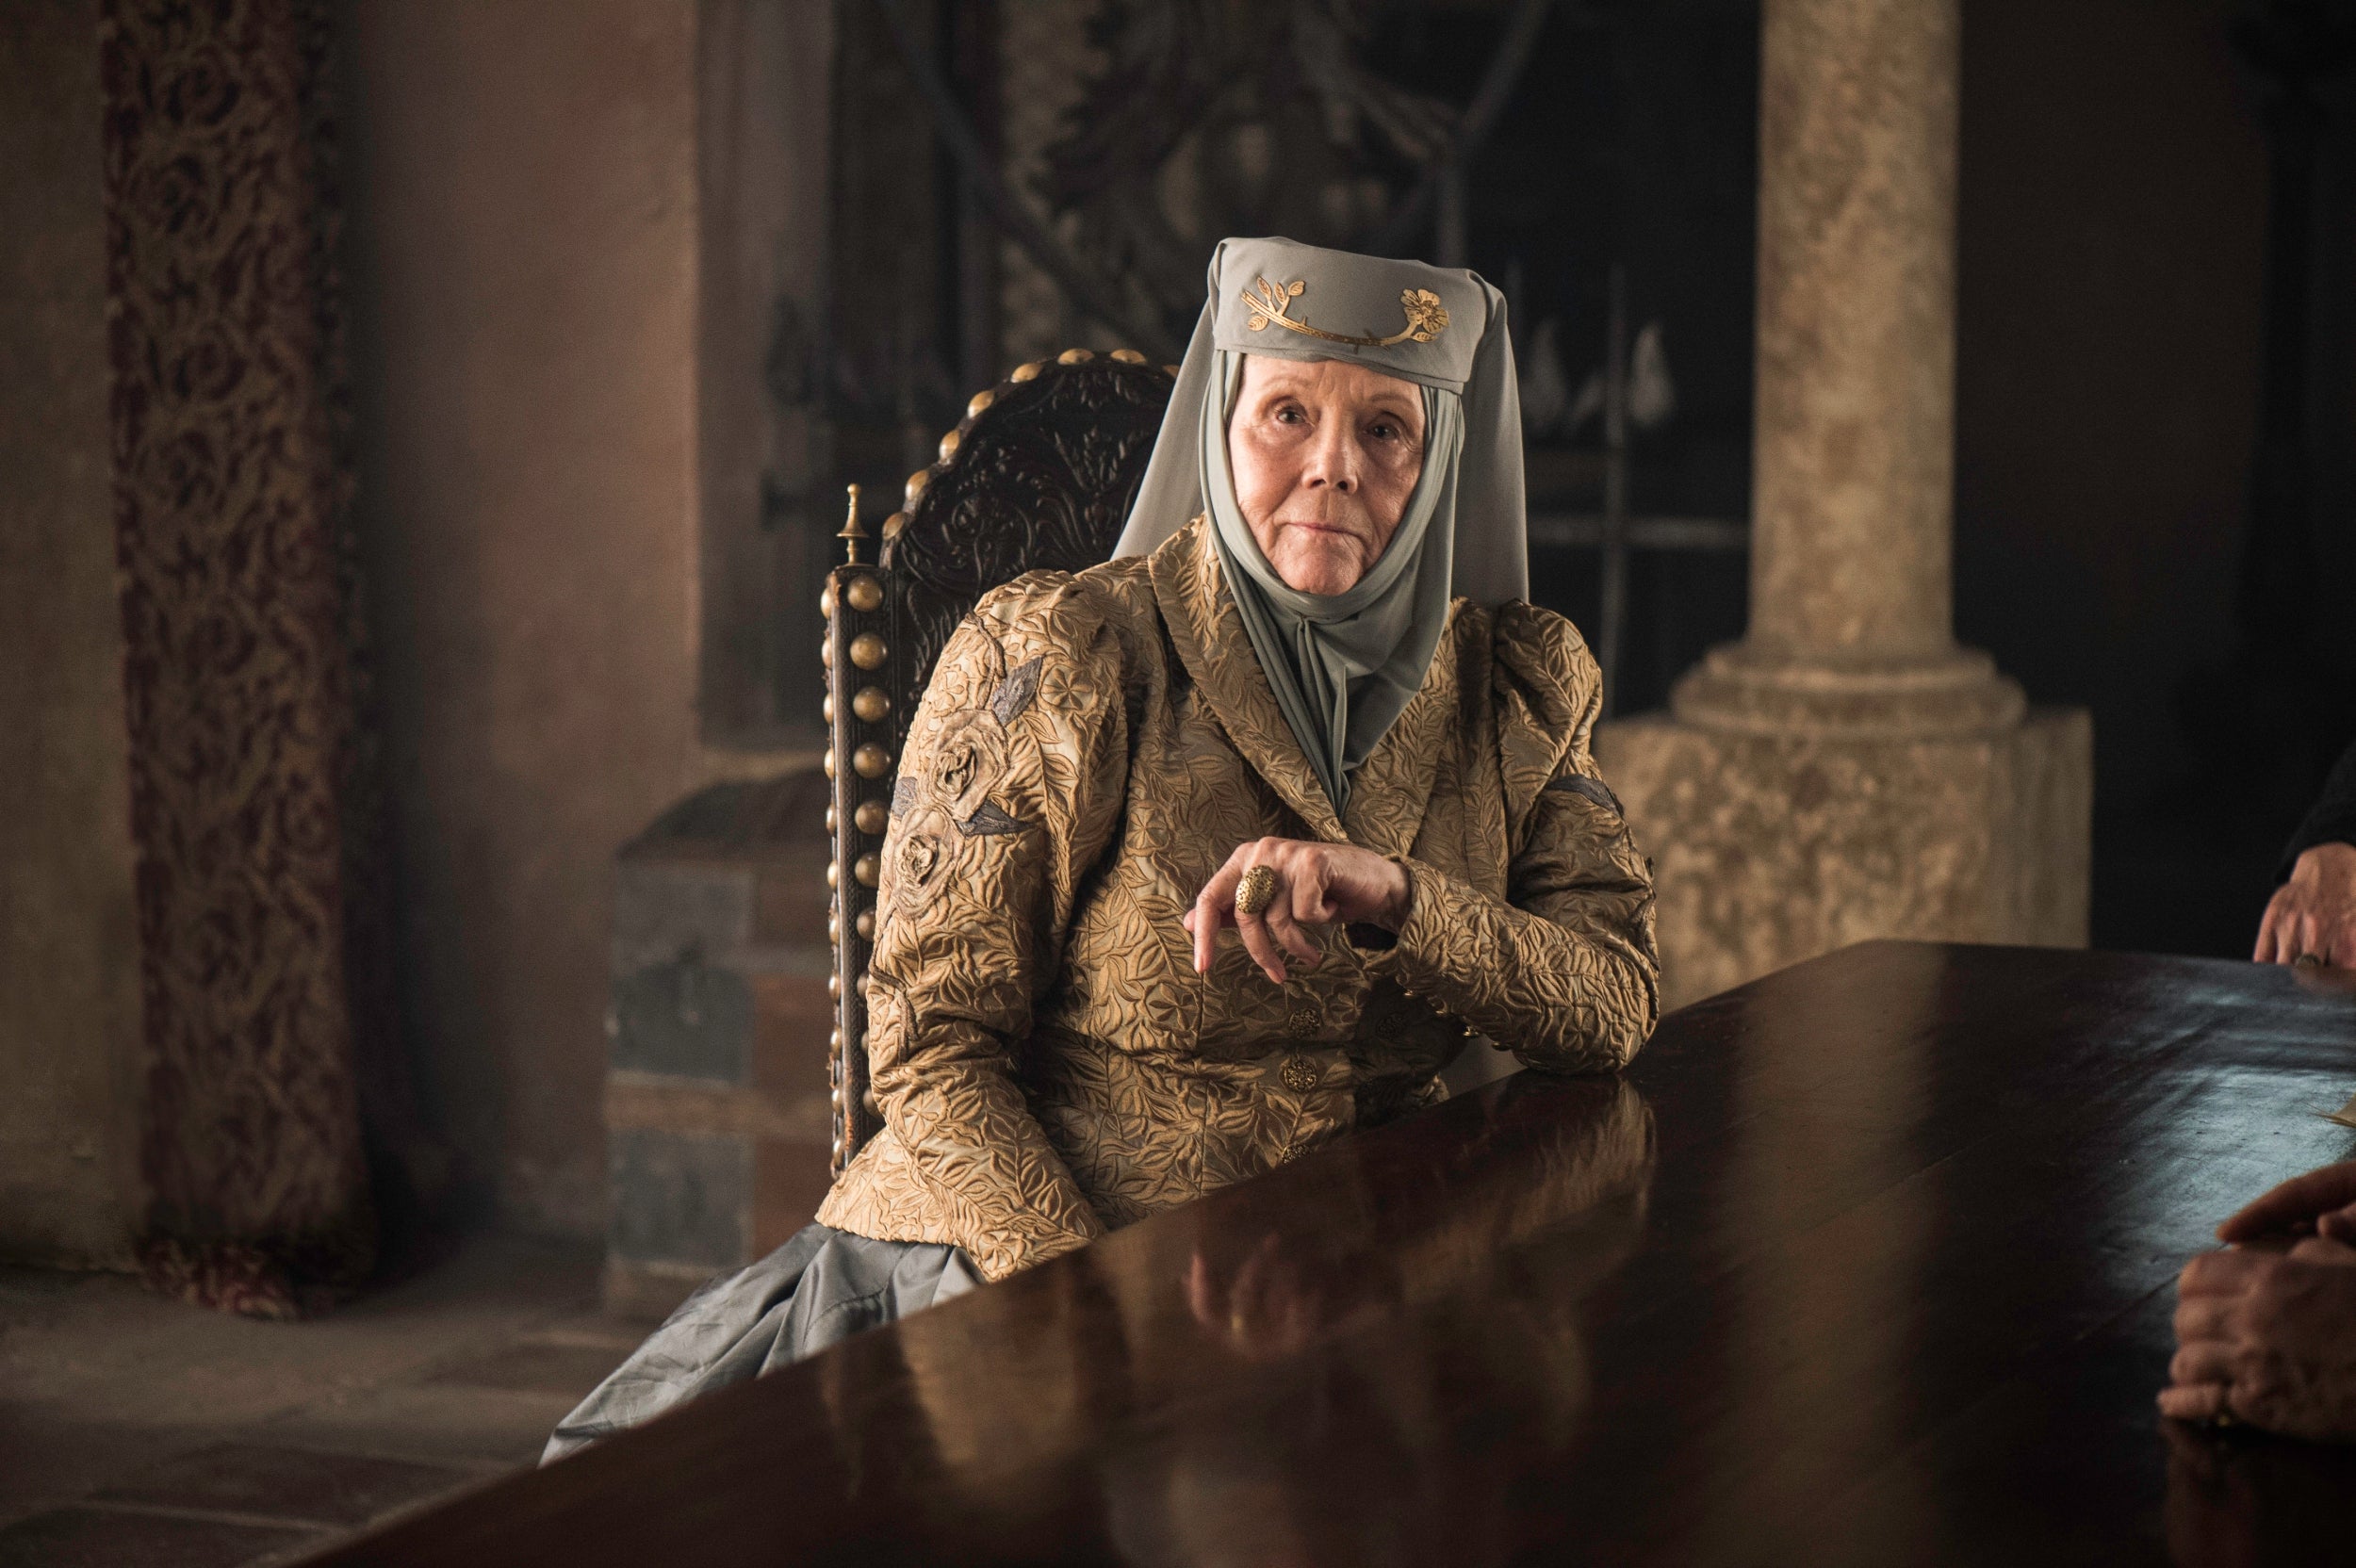 Rigg as Lady Olenna Tyrell in 'Game of Thrones'